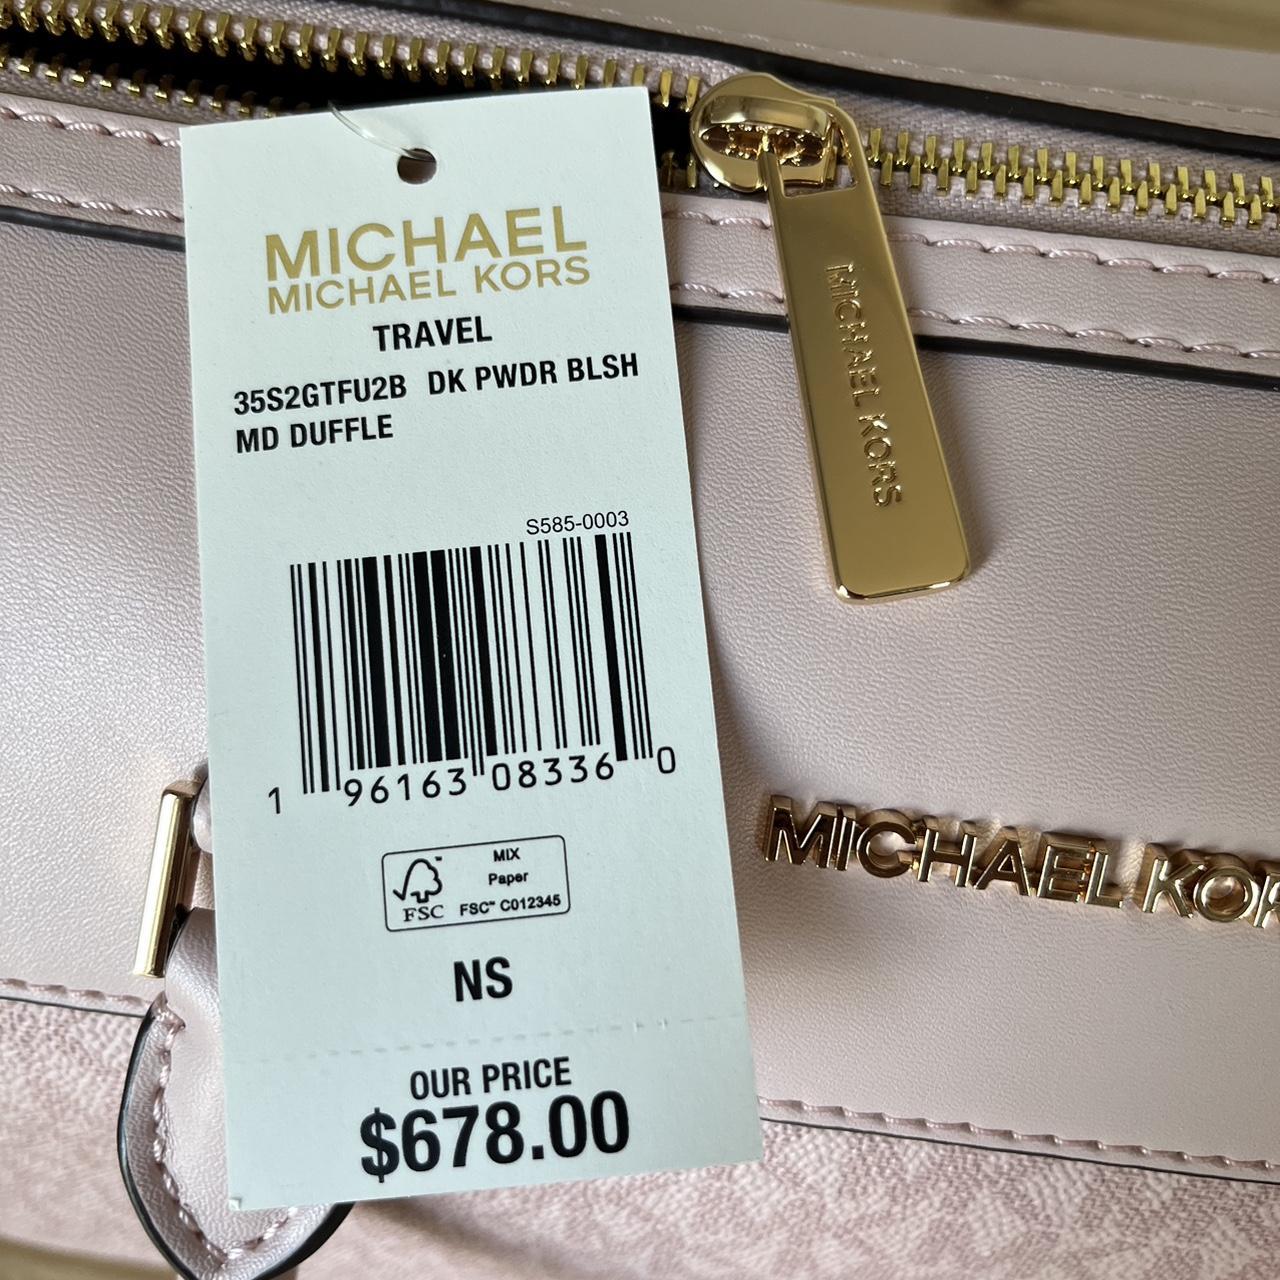 Authentic Michael Kors Never-full bag with large - Depop